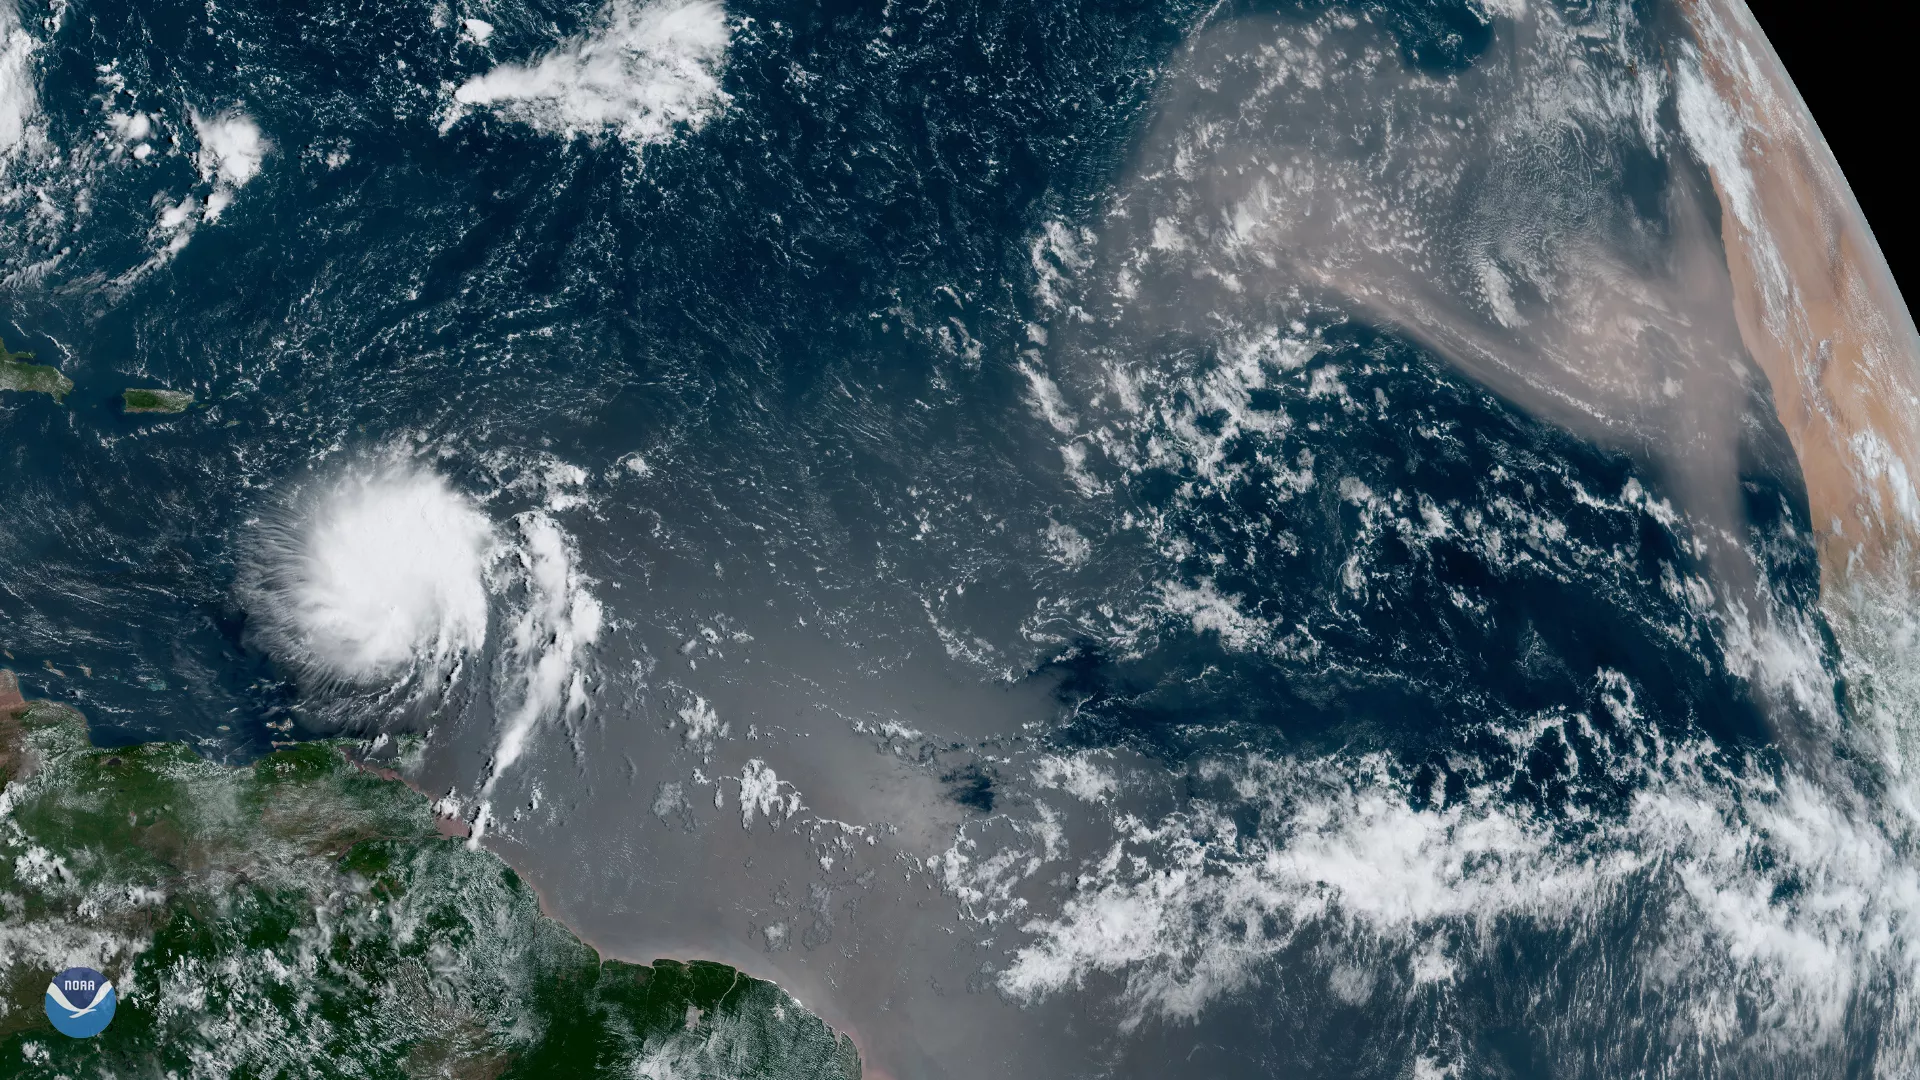 GOES East GeoColor capture of the largest plumes of Saharan dust this year blowing across the Atlantic Ocean on Tuesday, Aug. 27, 2019, as Tropical Storm Dorian passed over the Lesser Antilles.